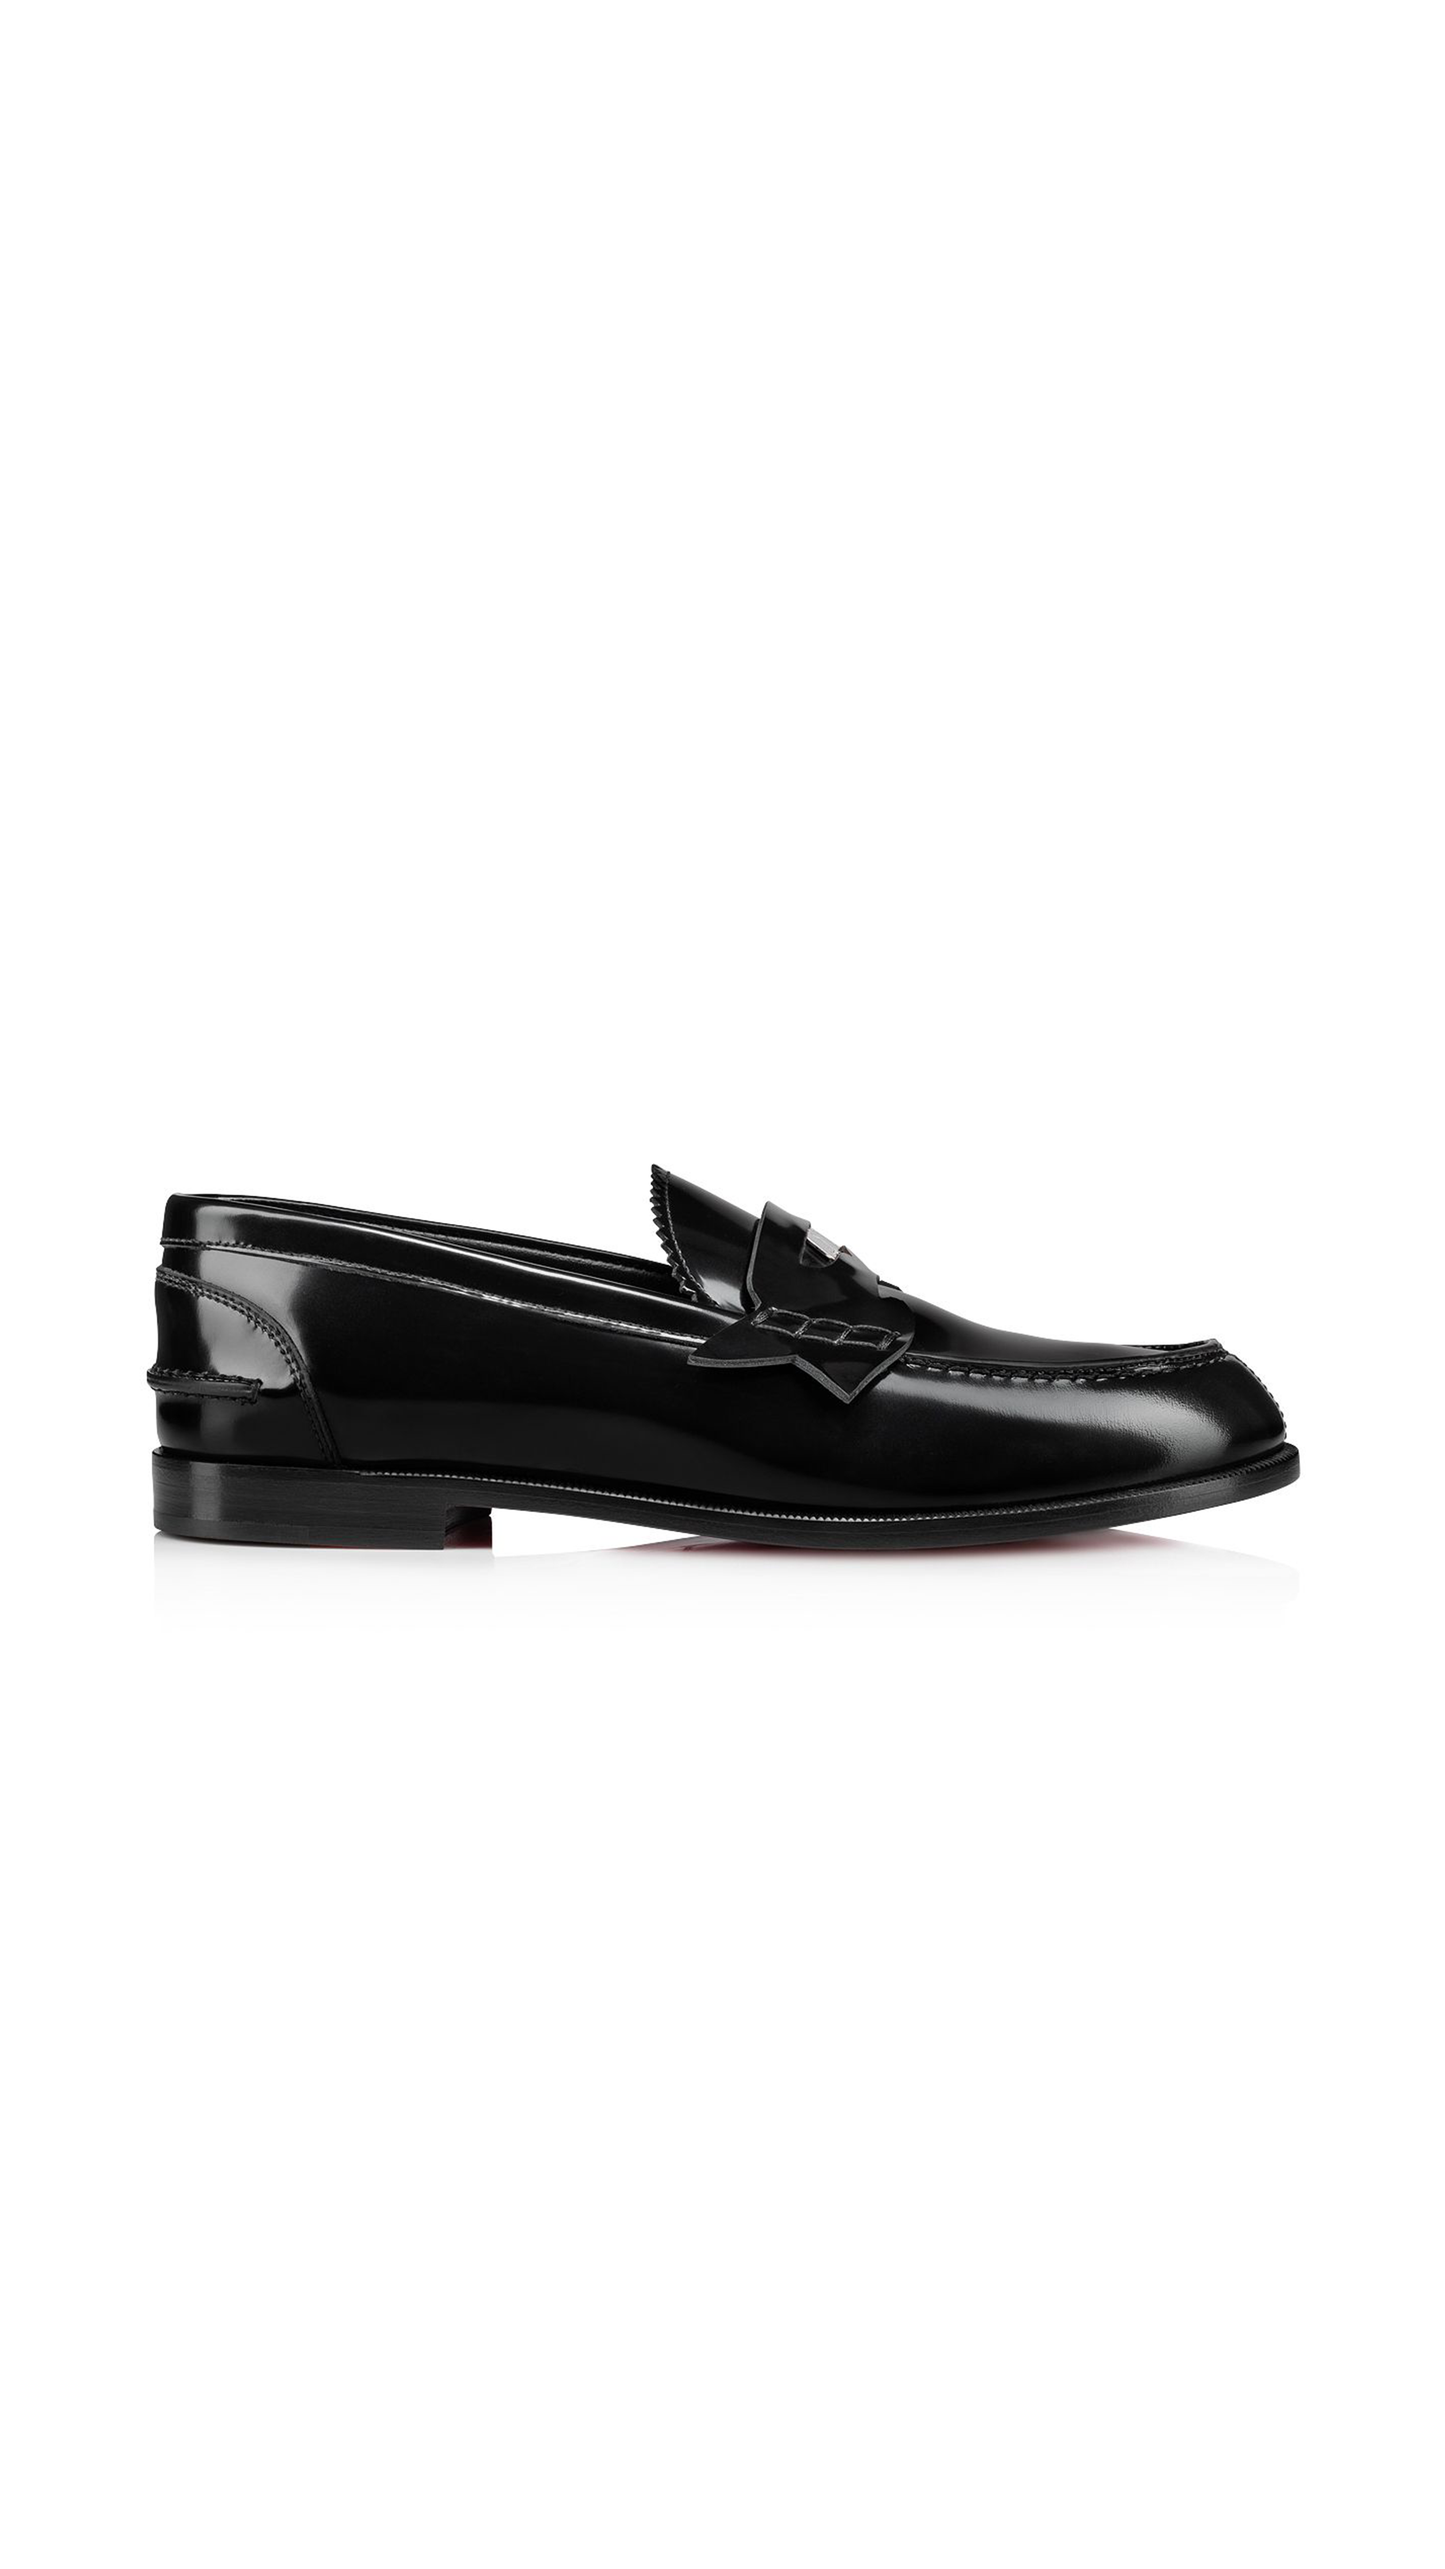 Penny Woman Loafers - Black